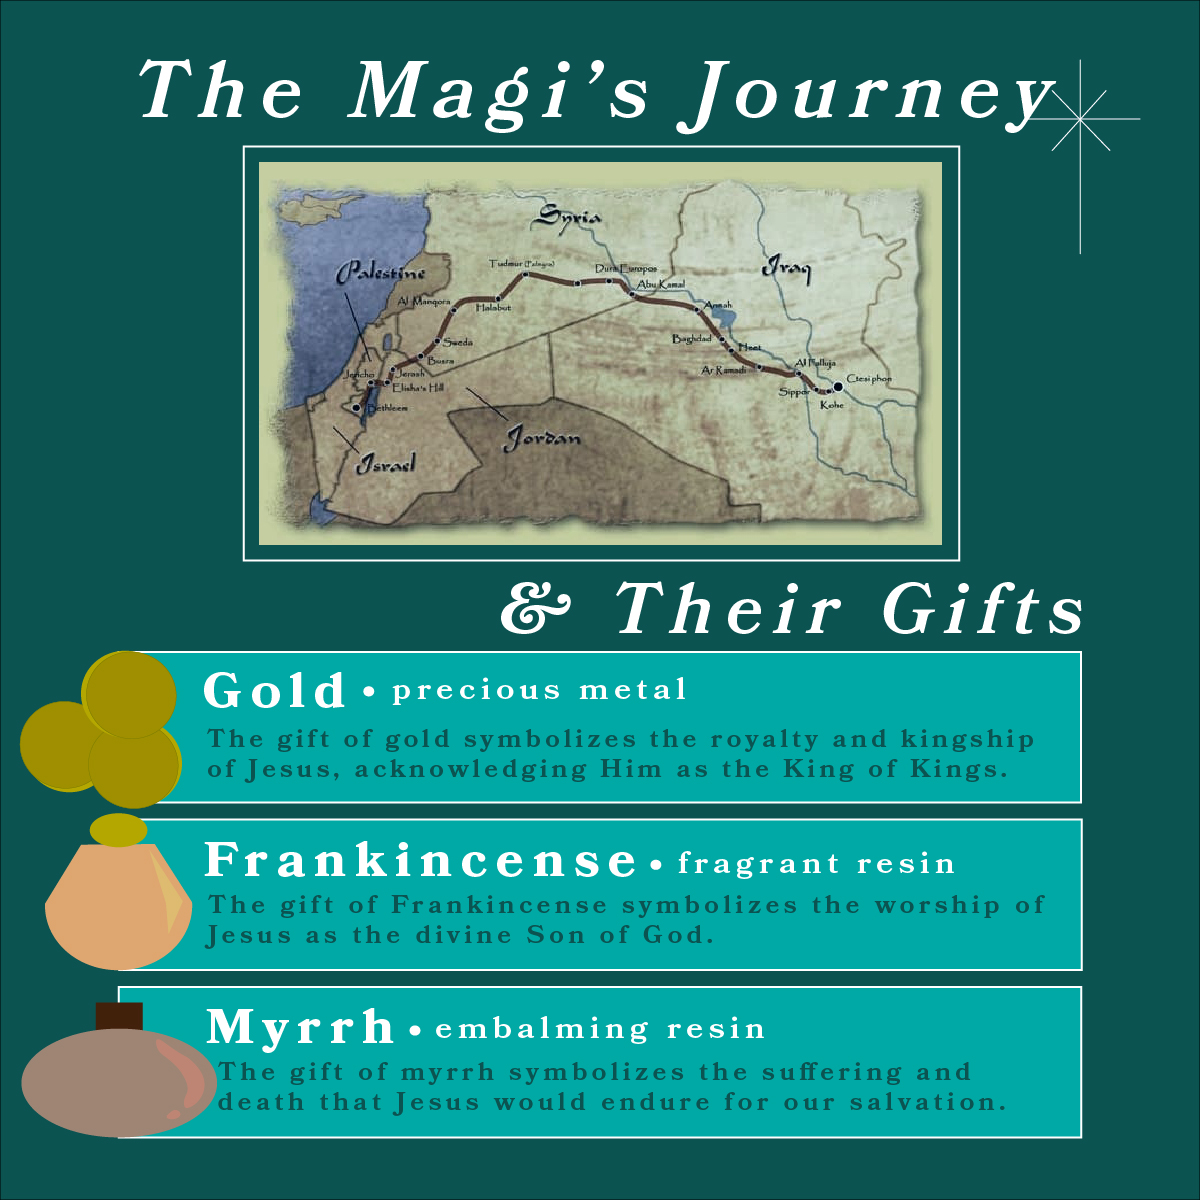 The Magis Journey and Their Gifts